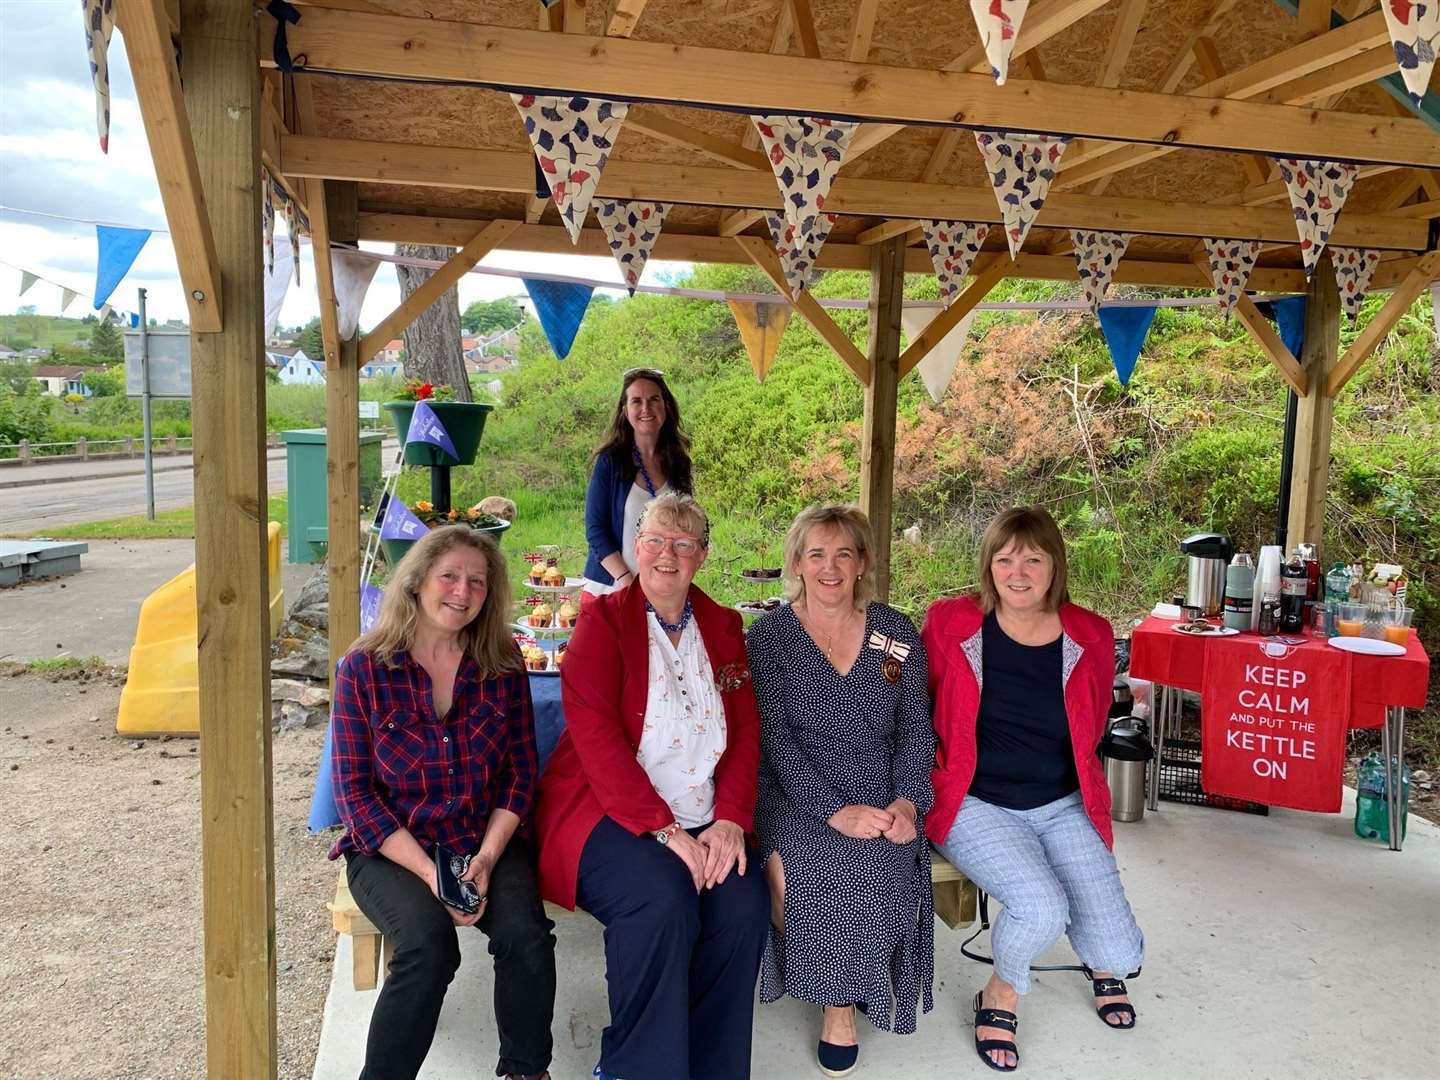 The afternoon jubilee picnic was organised by Lairg and District Community Initiatives.